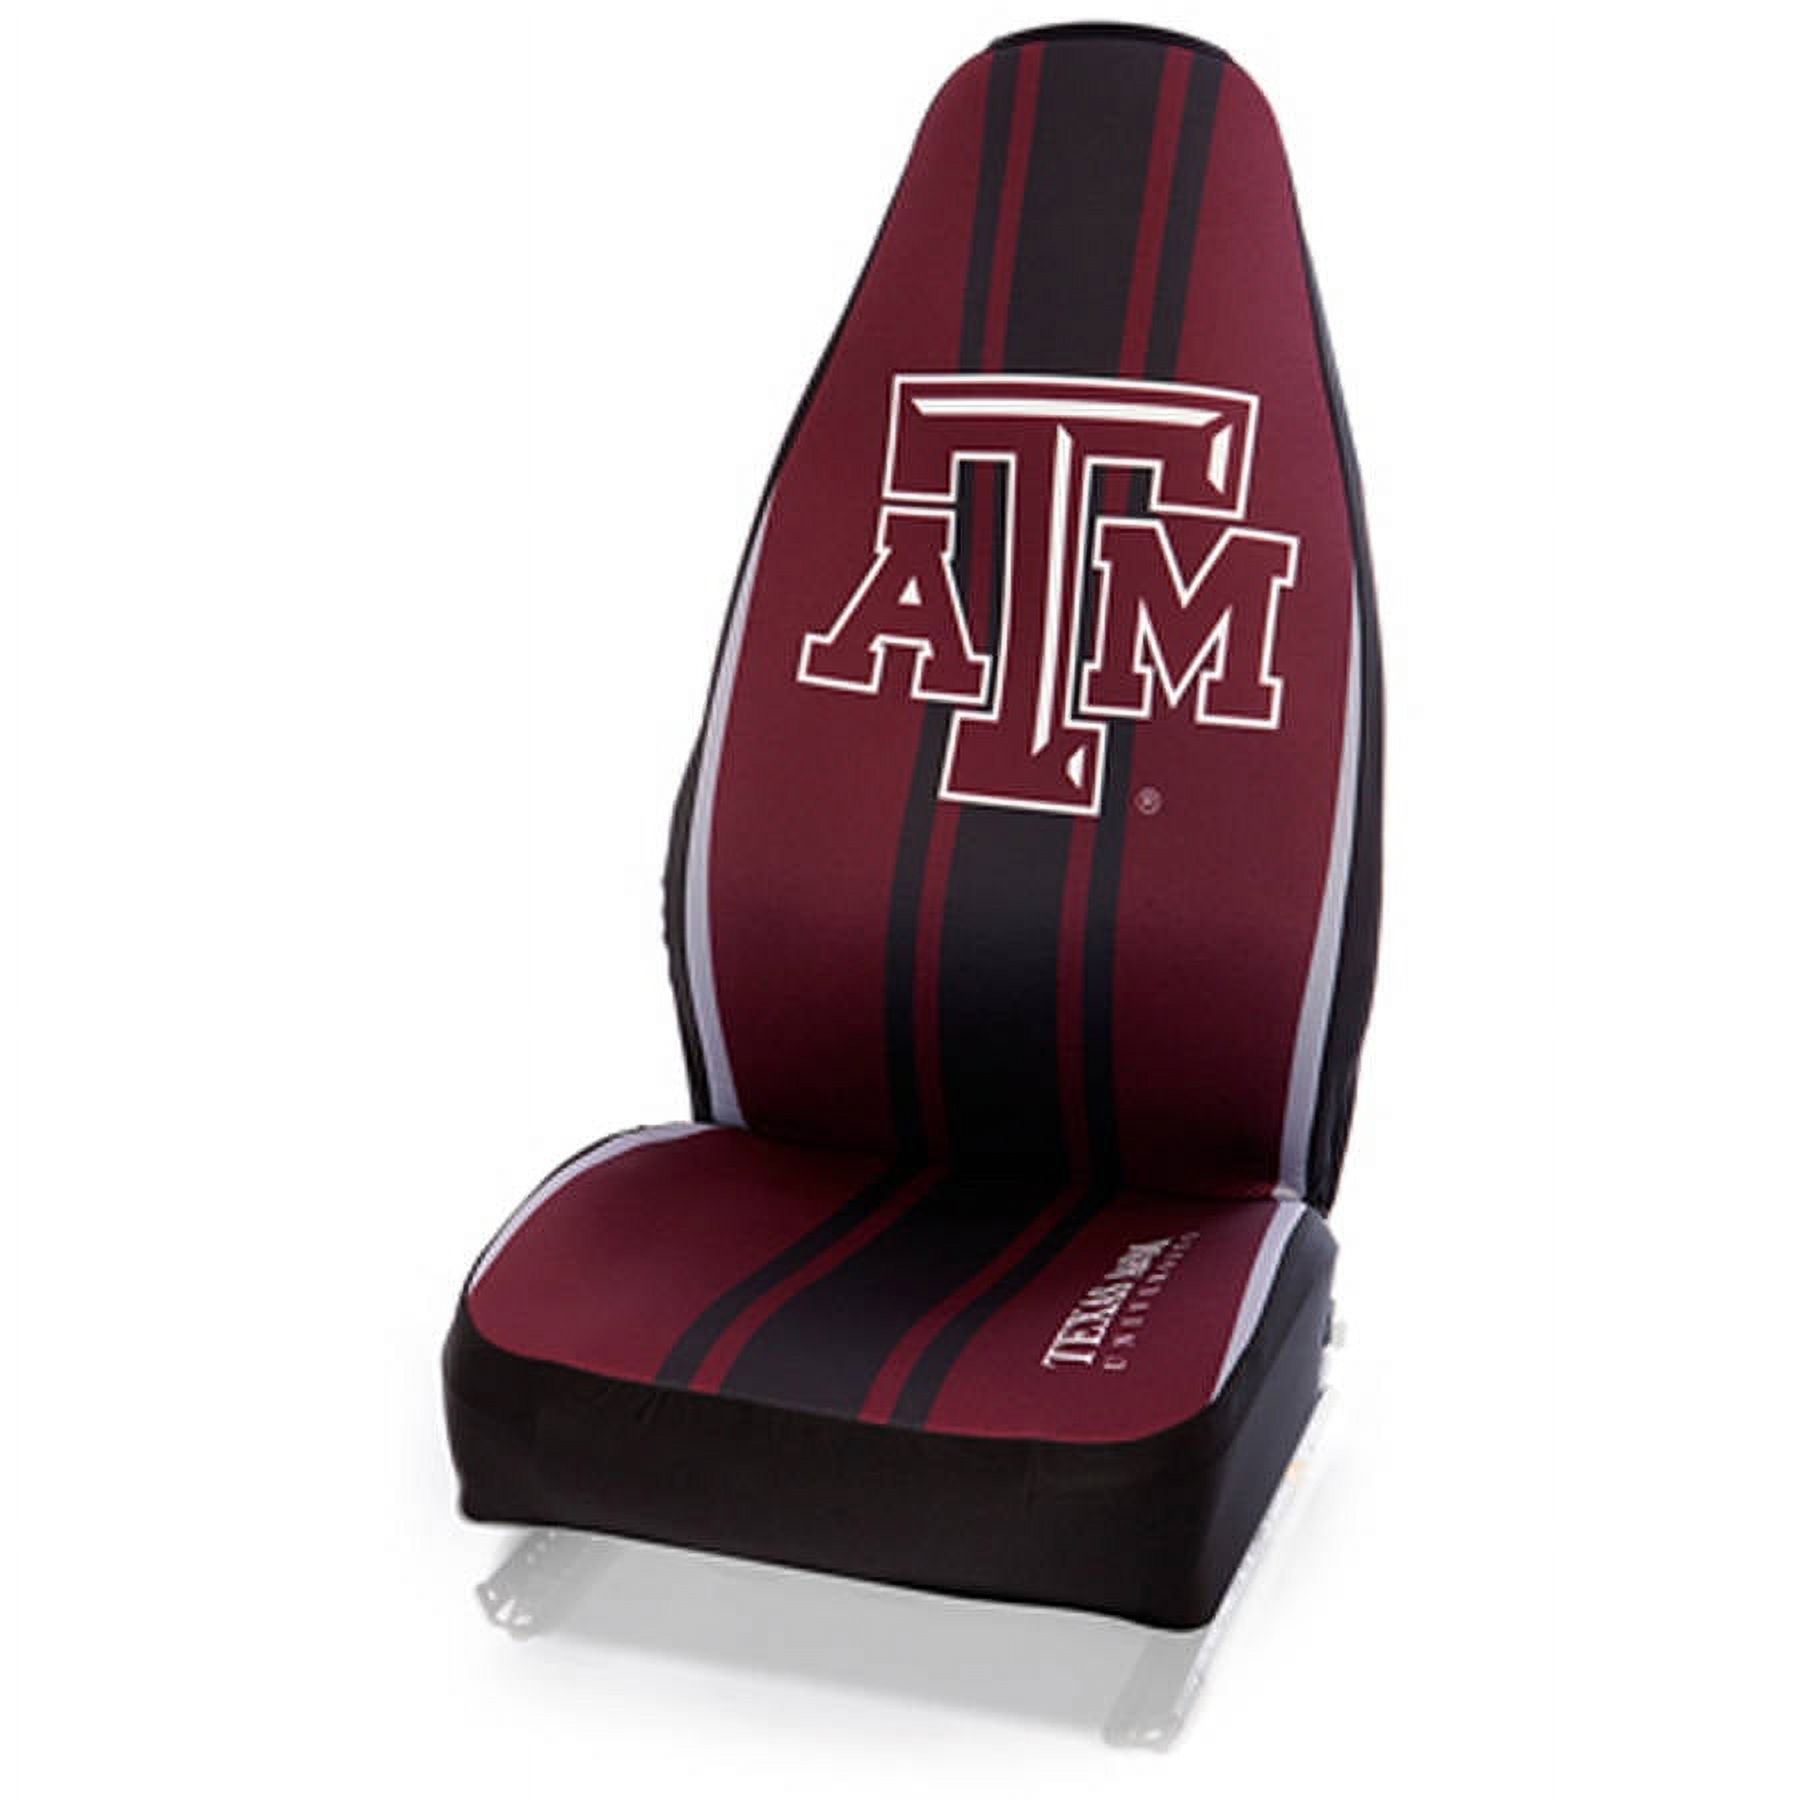 Coverking Universal Seat Cover Designer, Texas A&M University - image 1 of 4